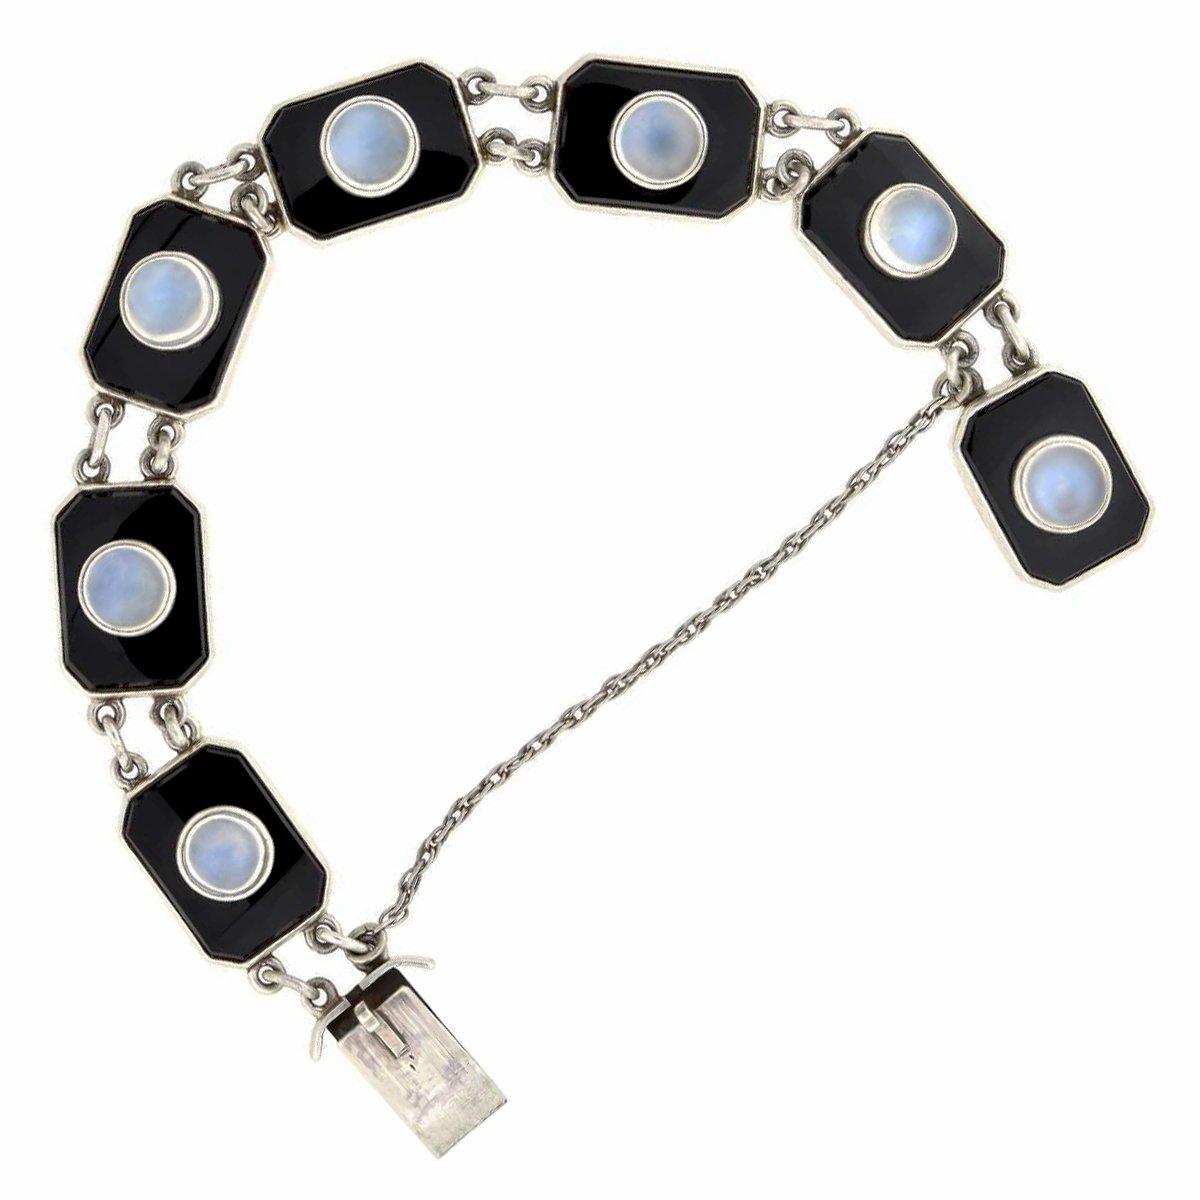 A gorgeous onyx link bracelet from the late Art Deco (1930s) era by Potter & Mellen, a renowned jeweler from Cleveland, Ohio. This unusual piece is crafted in sterling silver, and comprised of seven stylish links that come together to form a